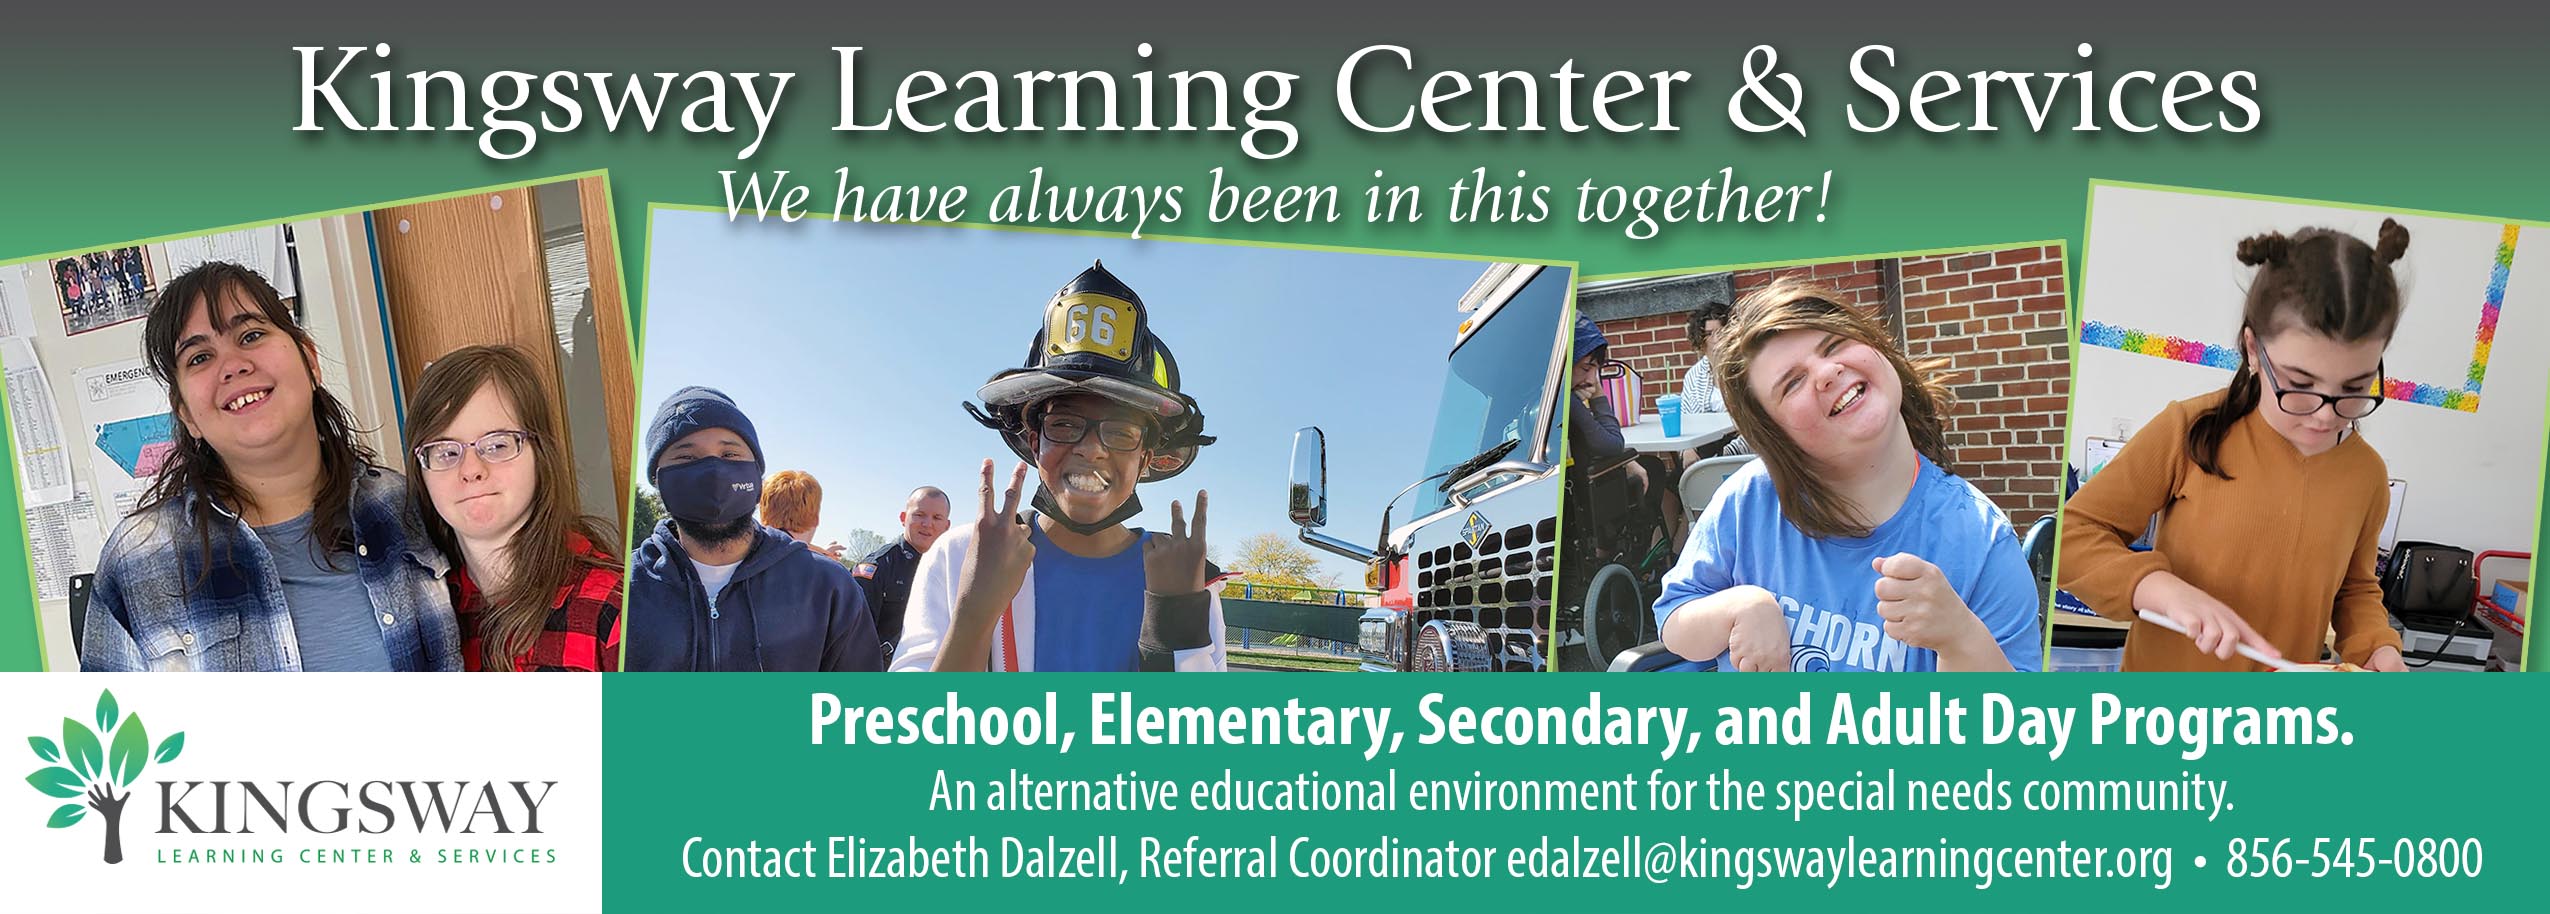 Kingsway Learning Center & Services